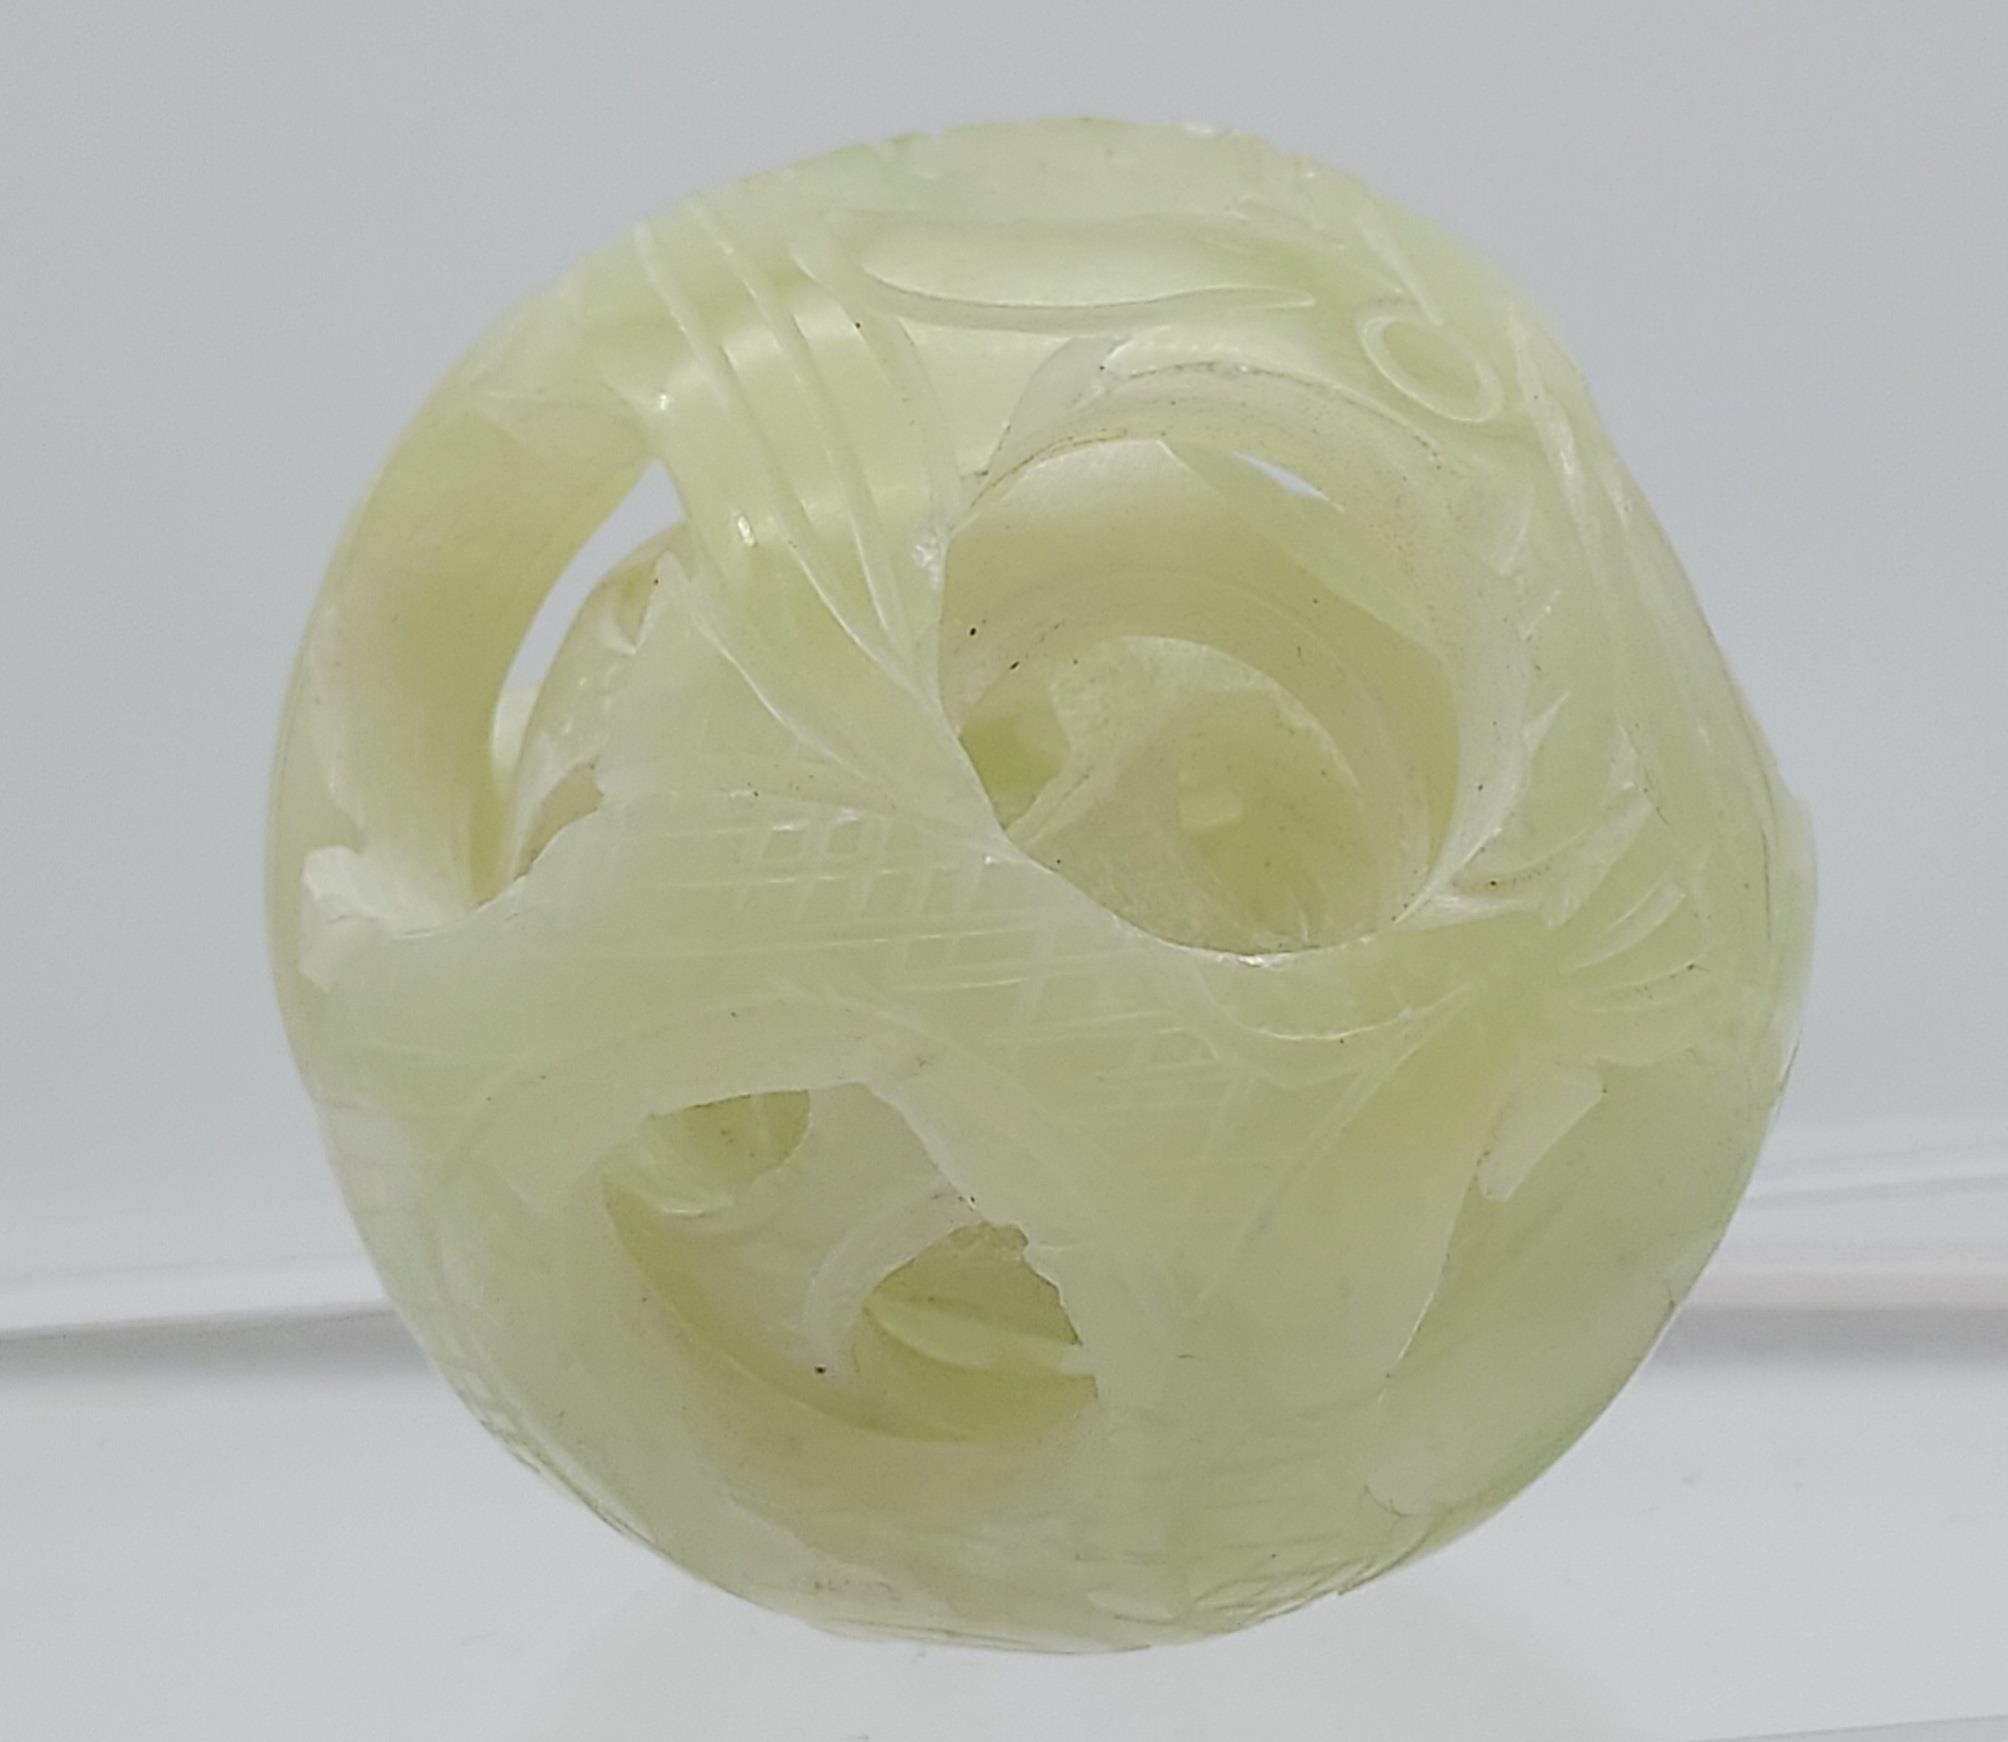 Antique early 20th century Chinese hand carved jade puzzle ball sculpture. [5cm in diameter]